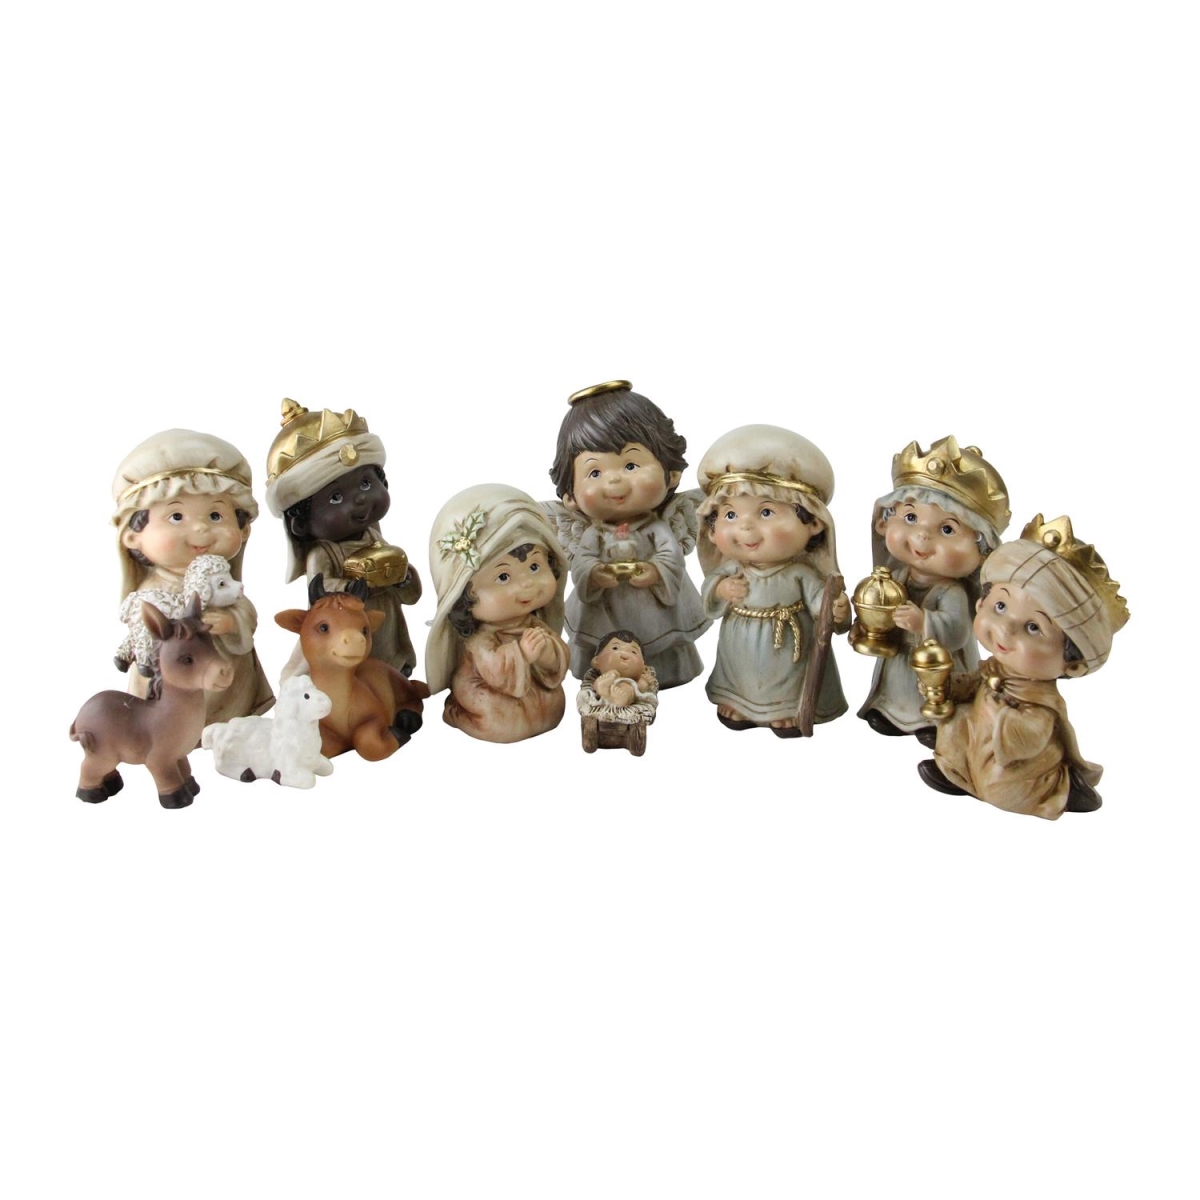 Northlight 32627888 4.5 in. Inspirational Christmas Nativity Figure Set with Gold Accents - 11 Piece